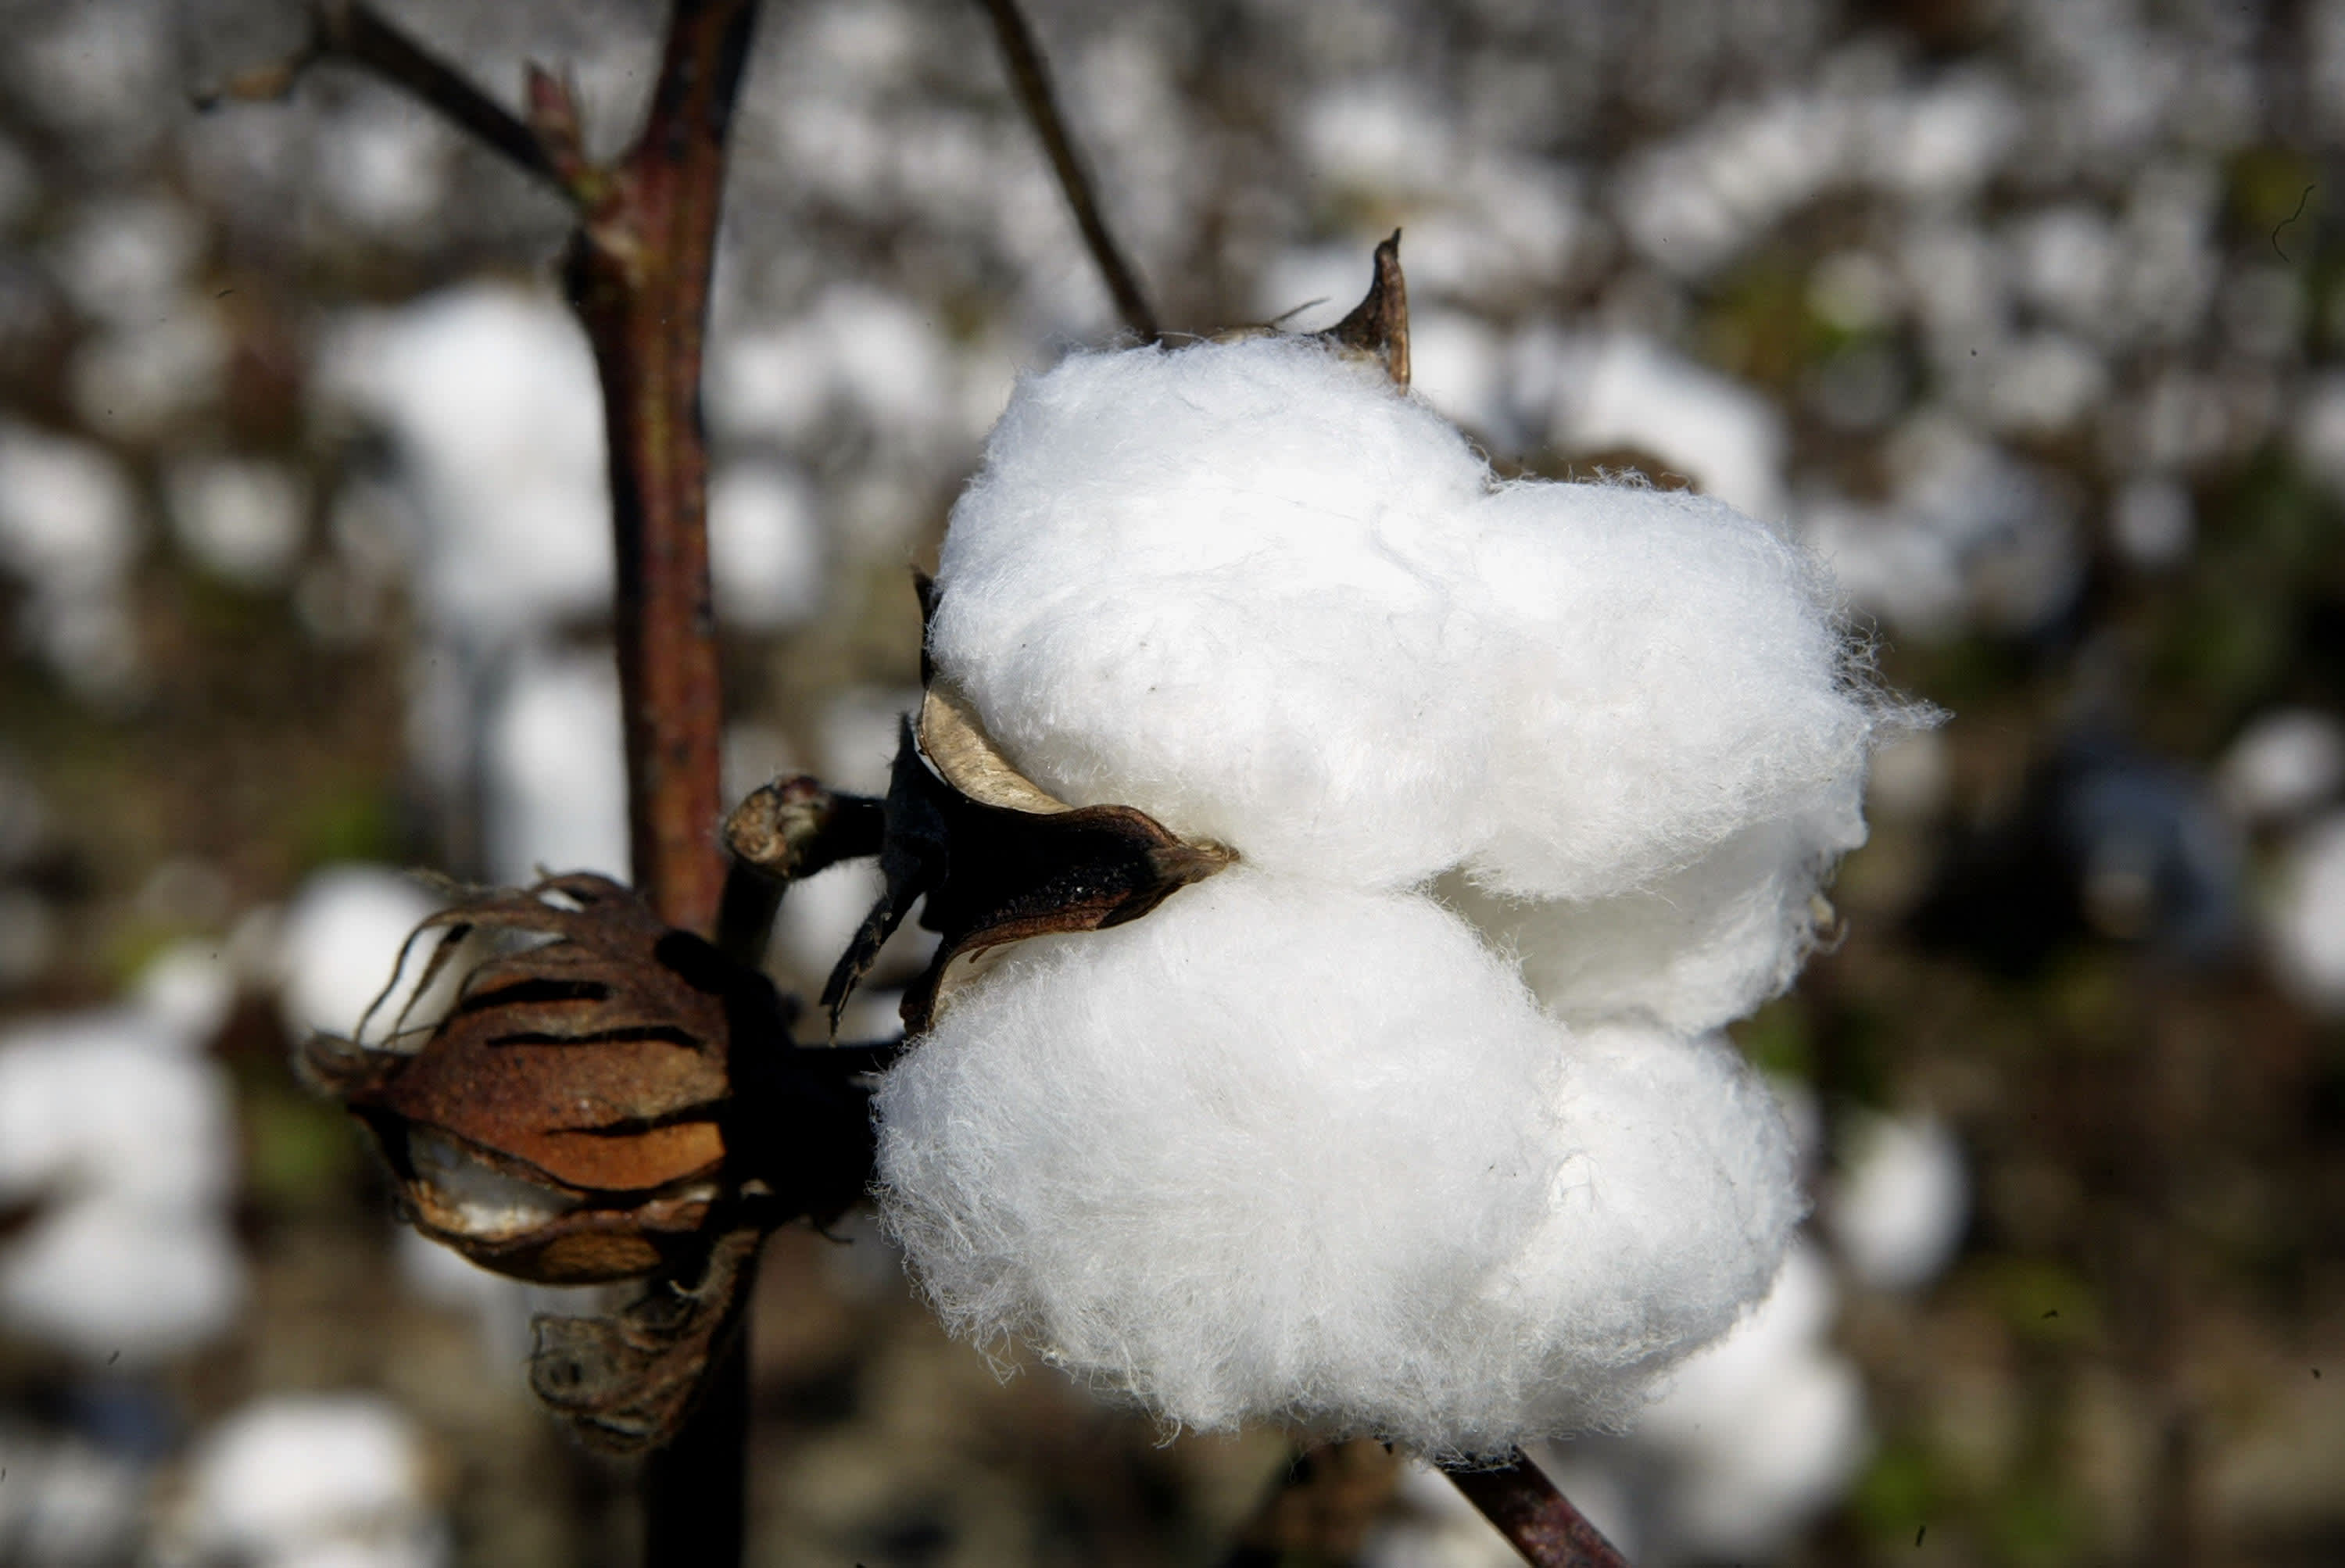 Cotton prices just hit a 10-year high. Here’s what that means for retailers and consumers